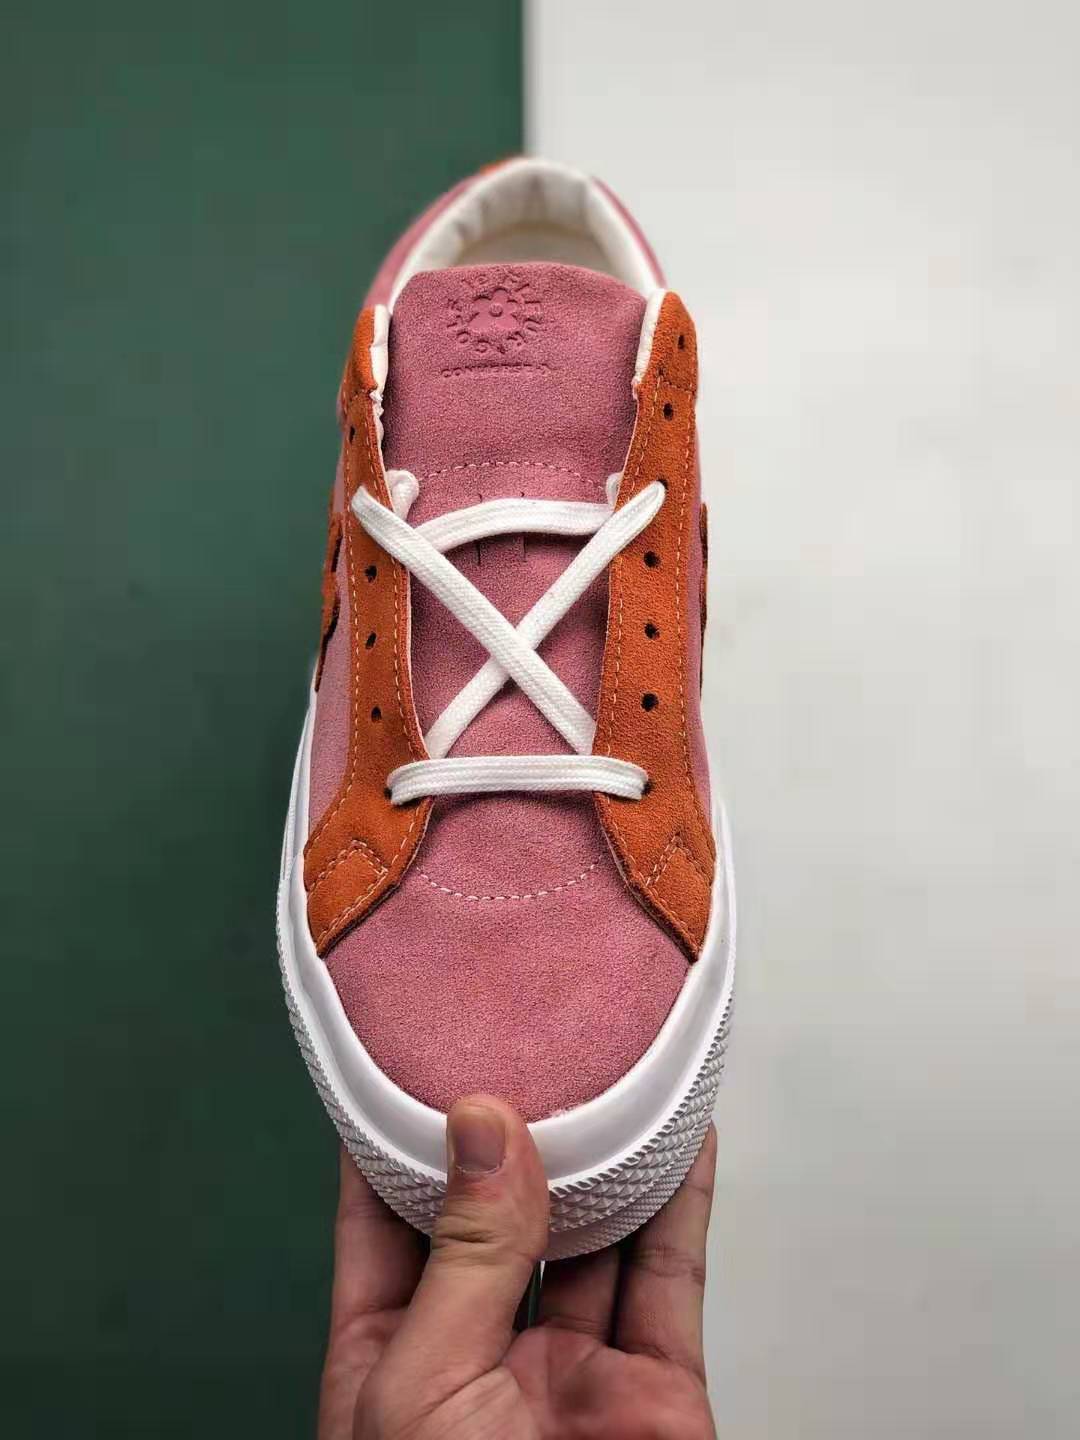 Converse One Star Ox Tyler the Creator Golf Le Fleur Pink Orange 162125C - Unique Style and Vibrant Colors | Free Shipping